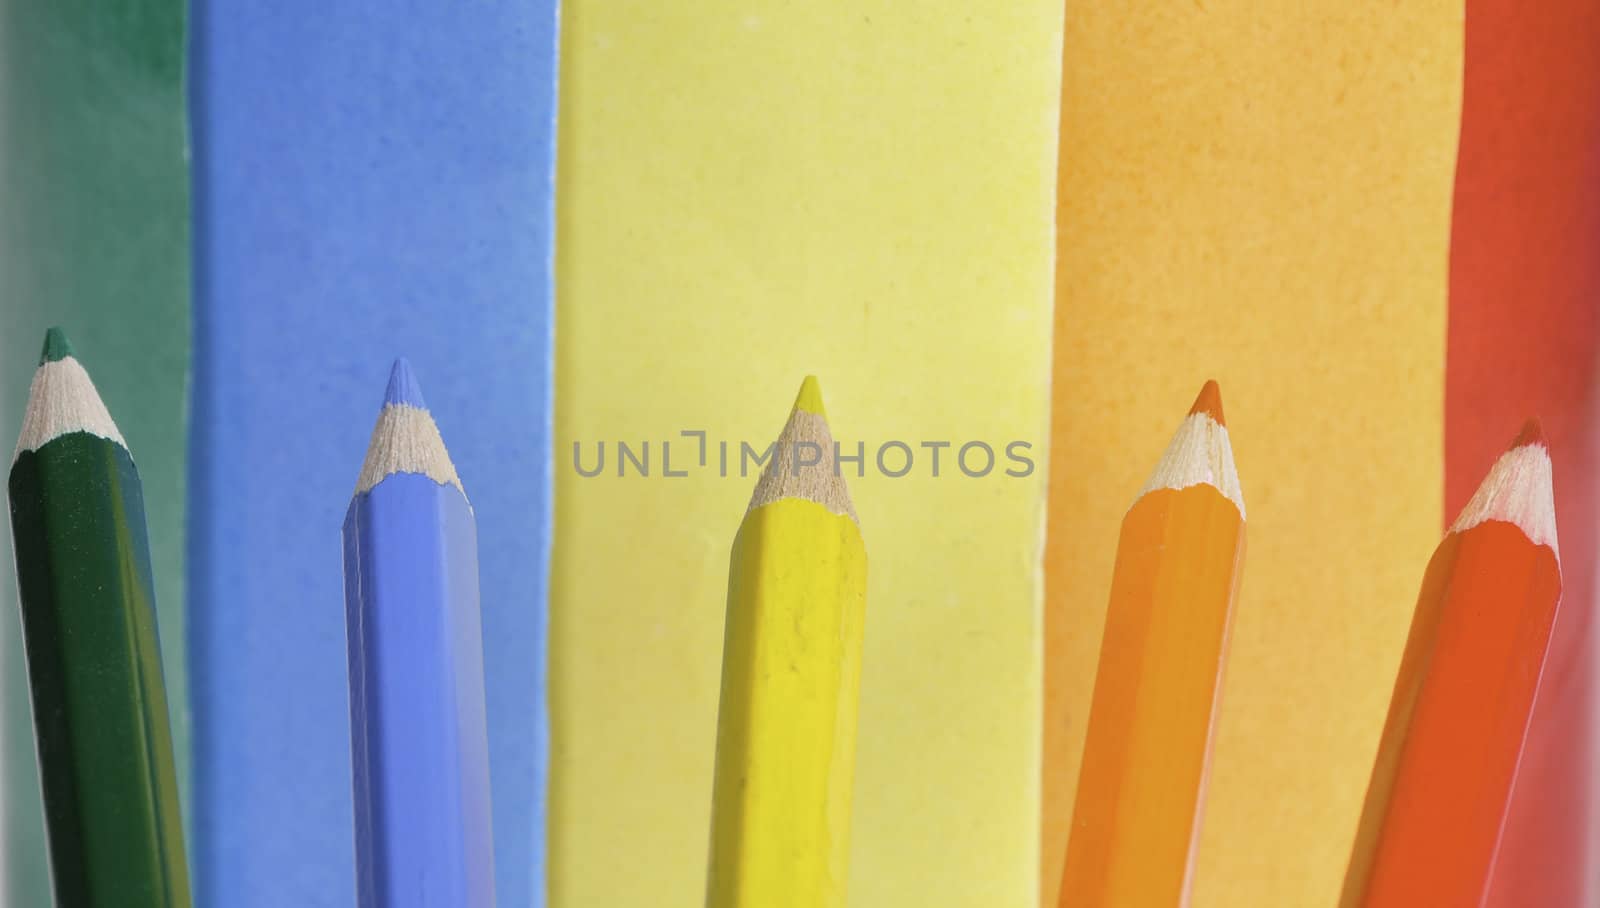 A colorful pencil crayons and scrapbooking papers ready for creative use.